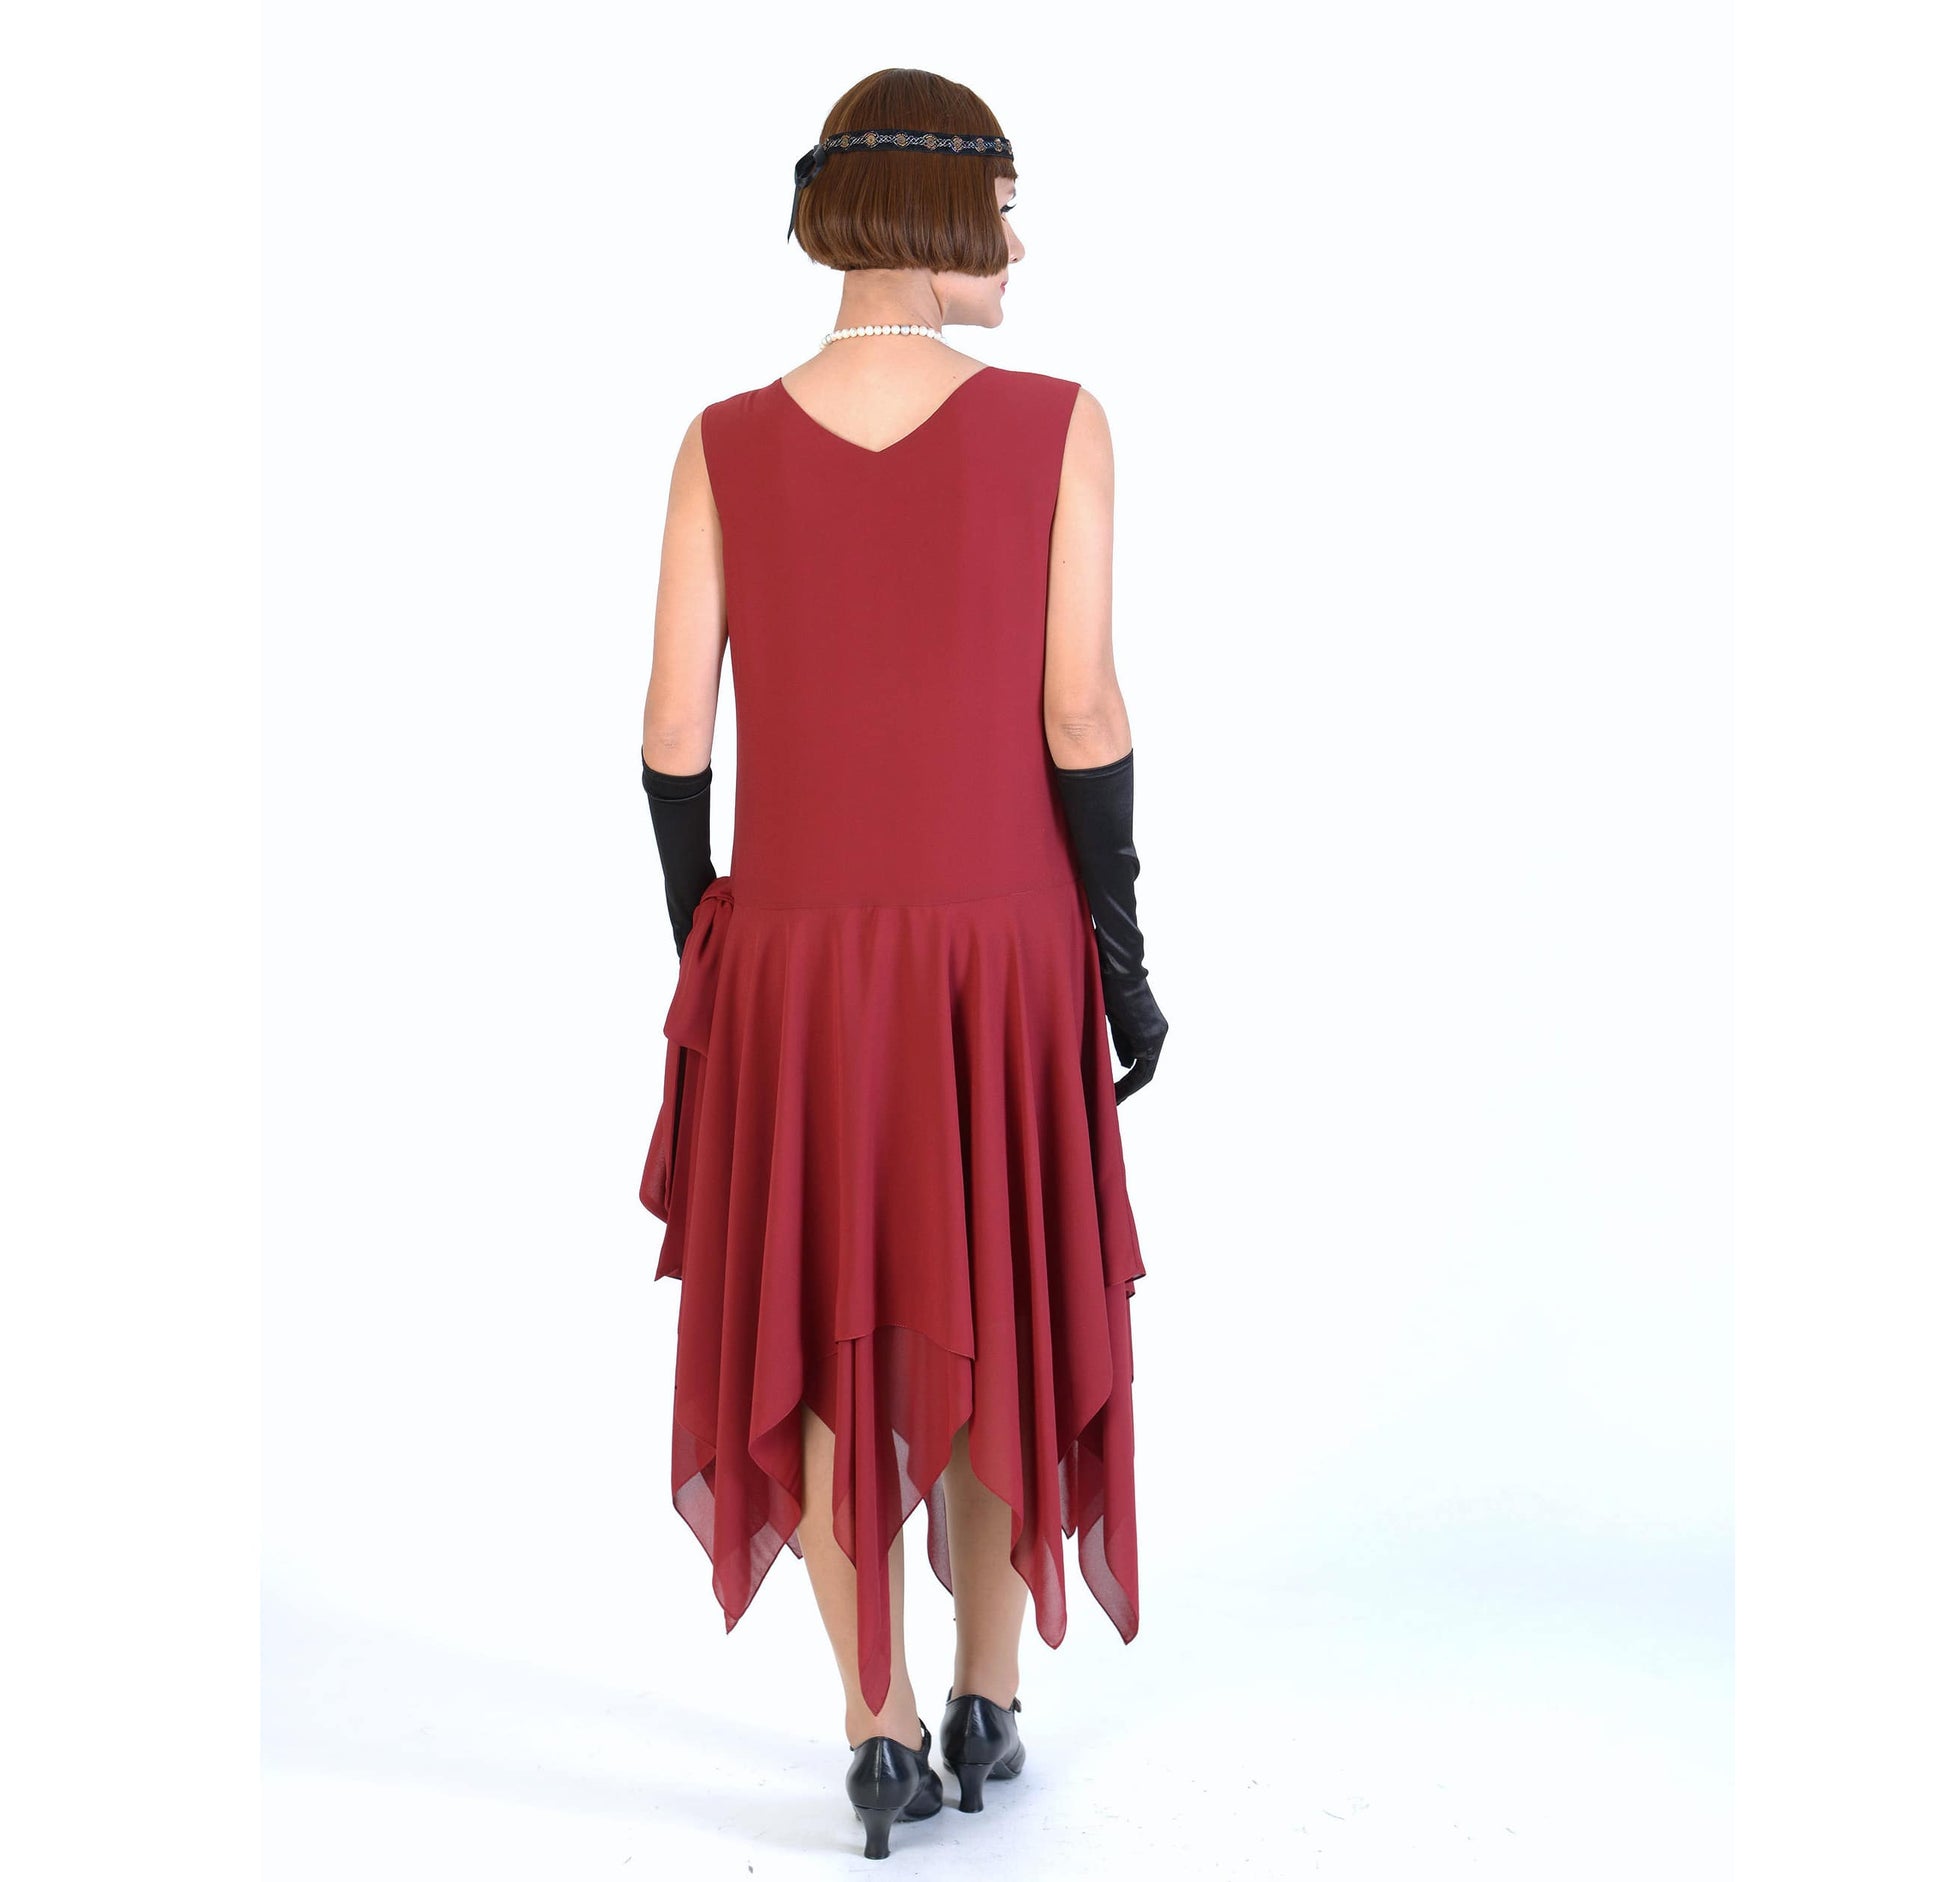 This 1920s evening formal dress, or Charleston dance dress or Great Gatsby party dress,  with handkerchief skirt is made of maroon red chiffon. 